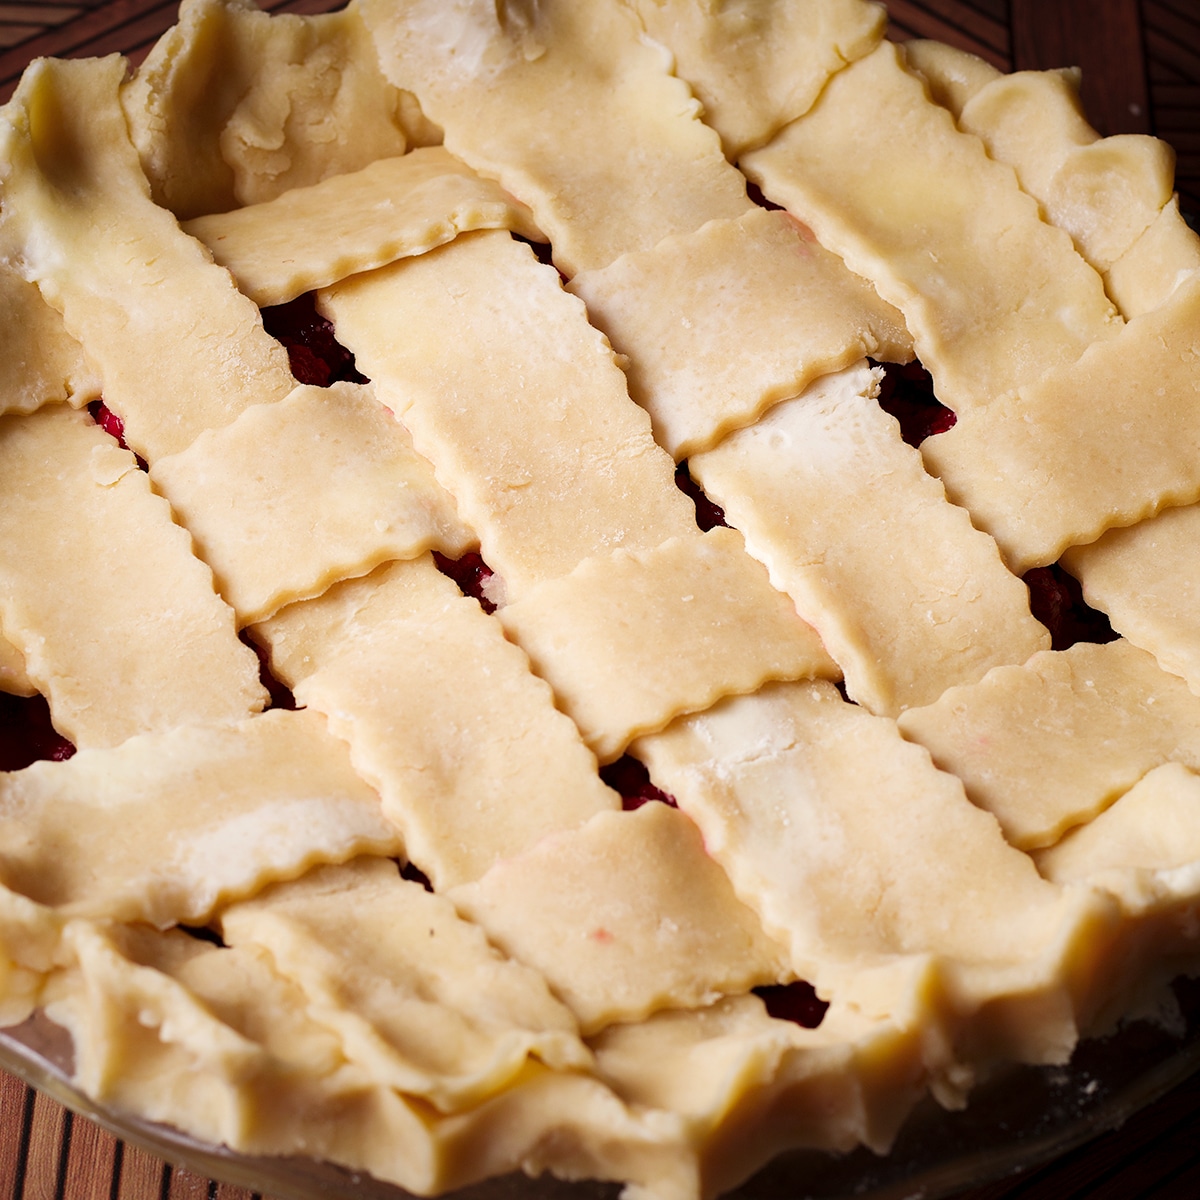 Crimping the edges of a pie crust topped with a lattice crust.